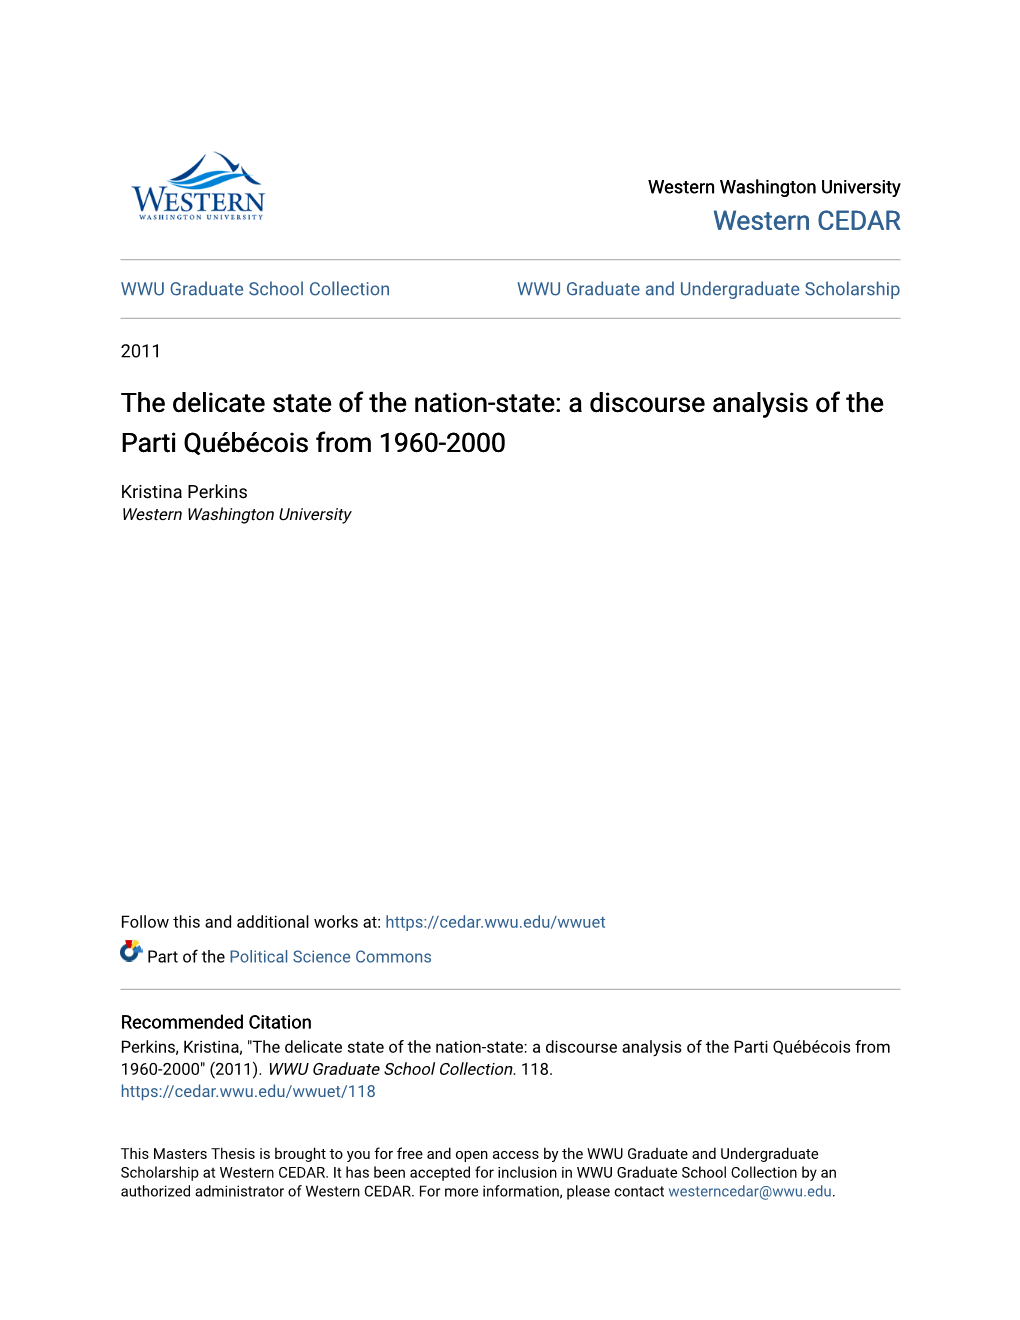 The Delicate State of the Nation-State: a Discourse Analysis of the Parti Québécois from 1960-2000